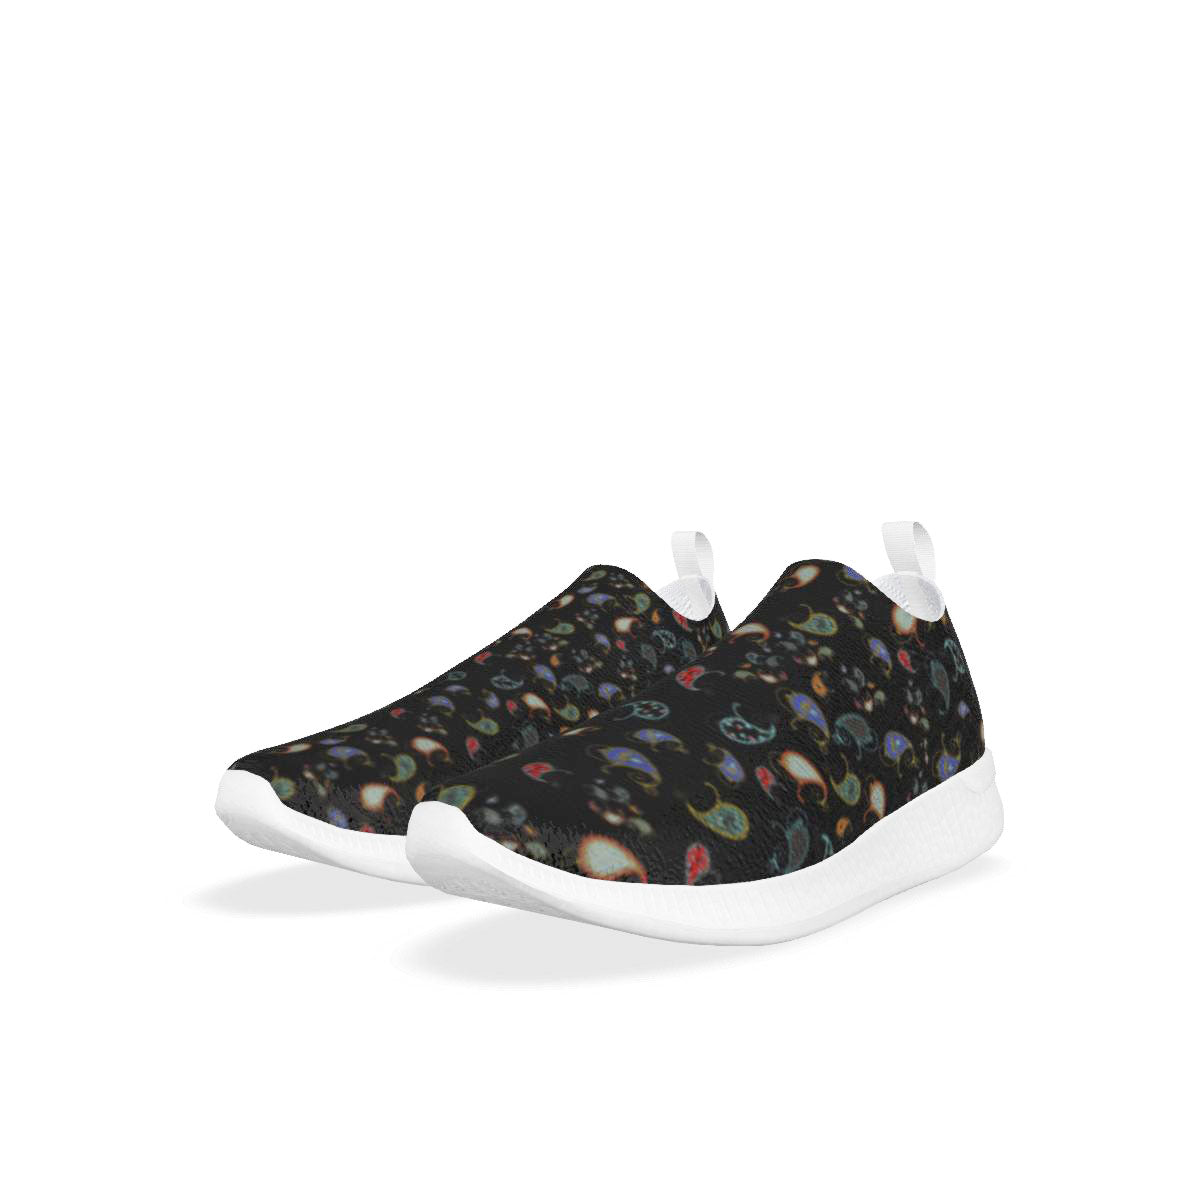 Pasley Park Two All-Over Print Man's Flying Woven Running Shoes